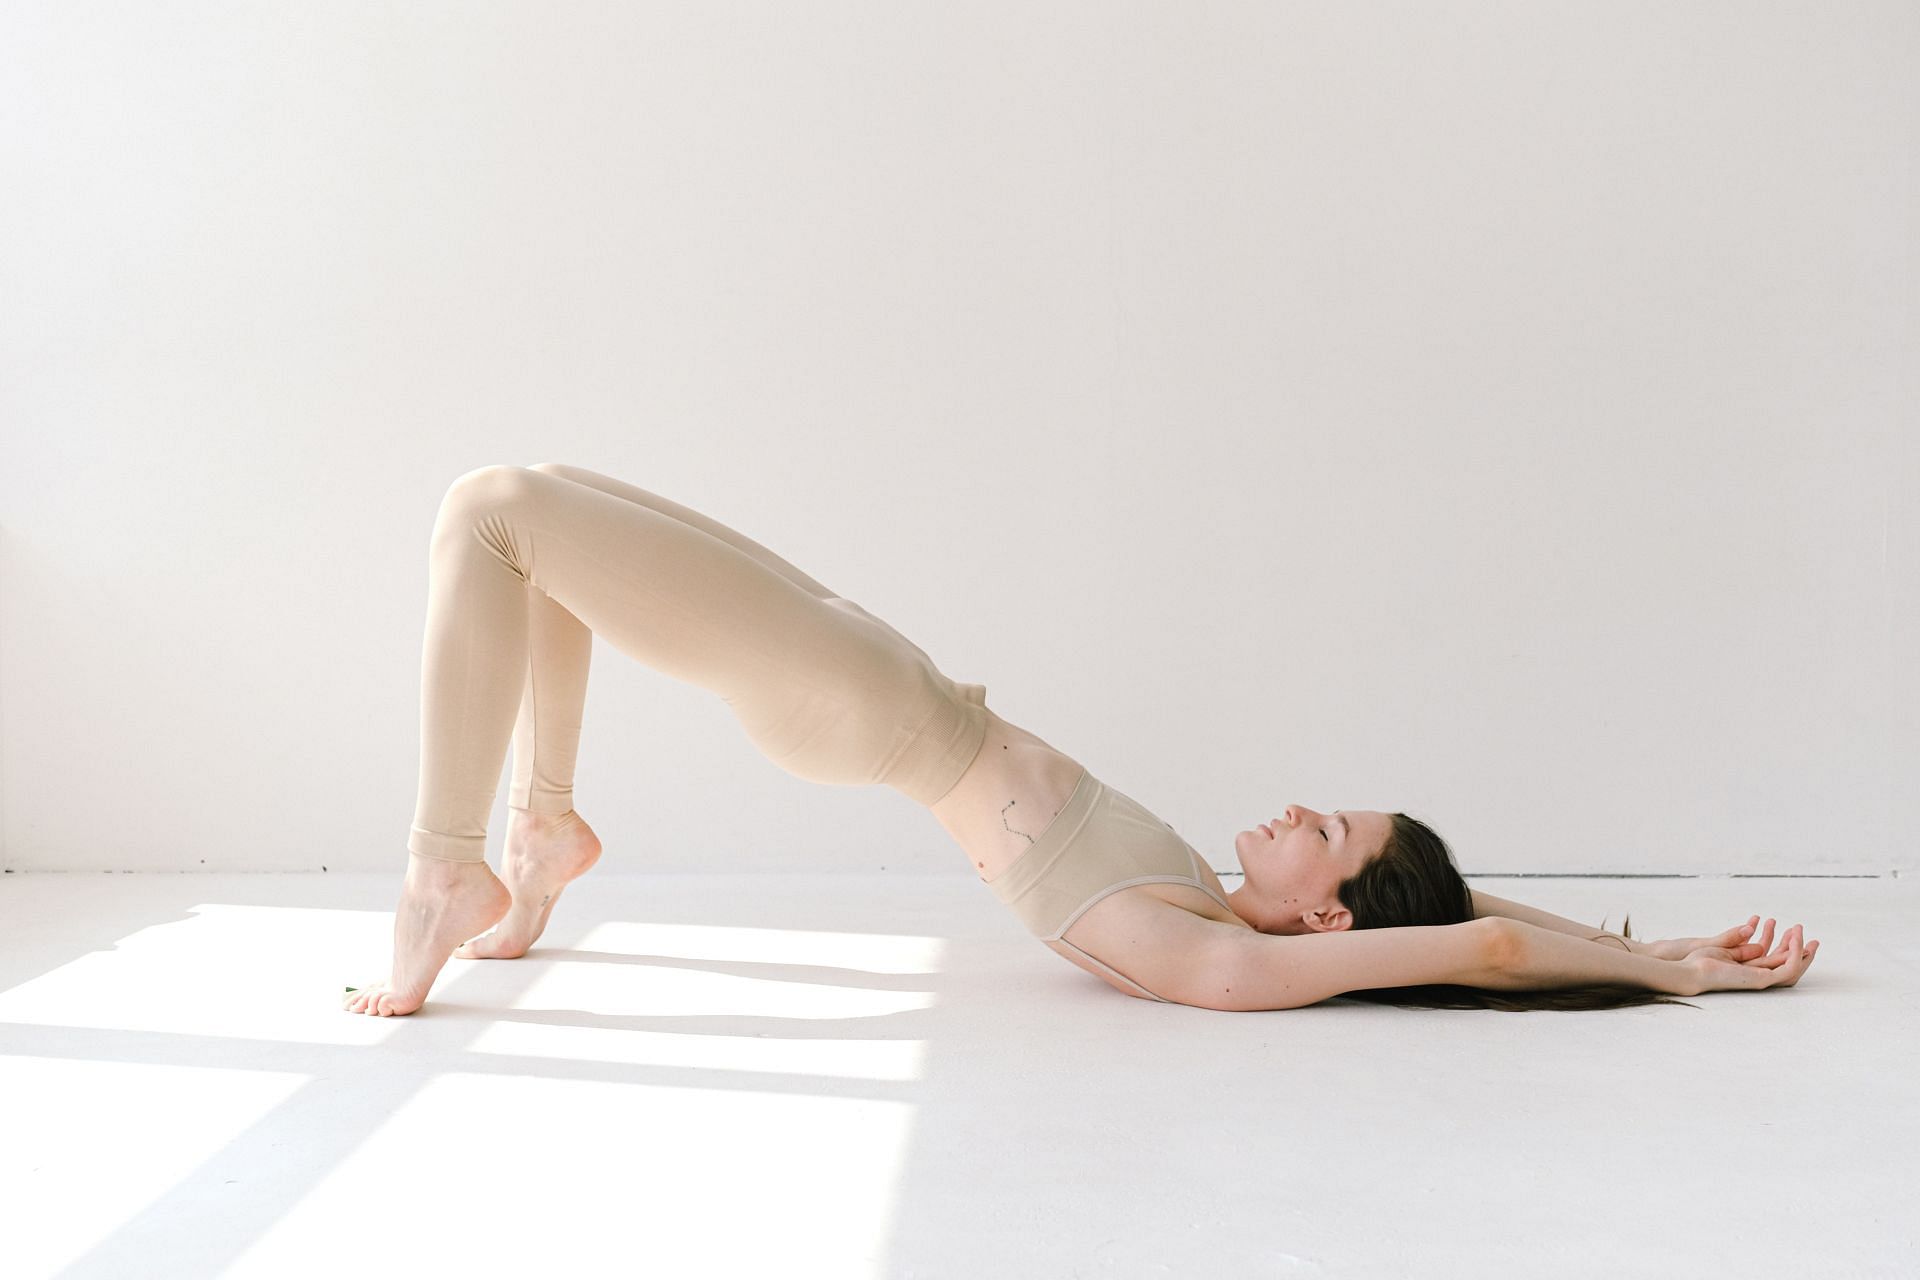 Glute bridges help to stretch your lower back, hips and legs (Image via Pexels/Anna Shvets)